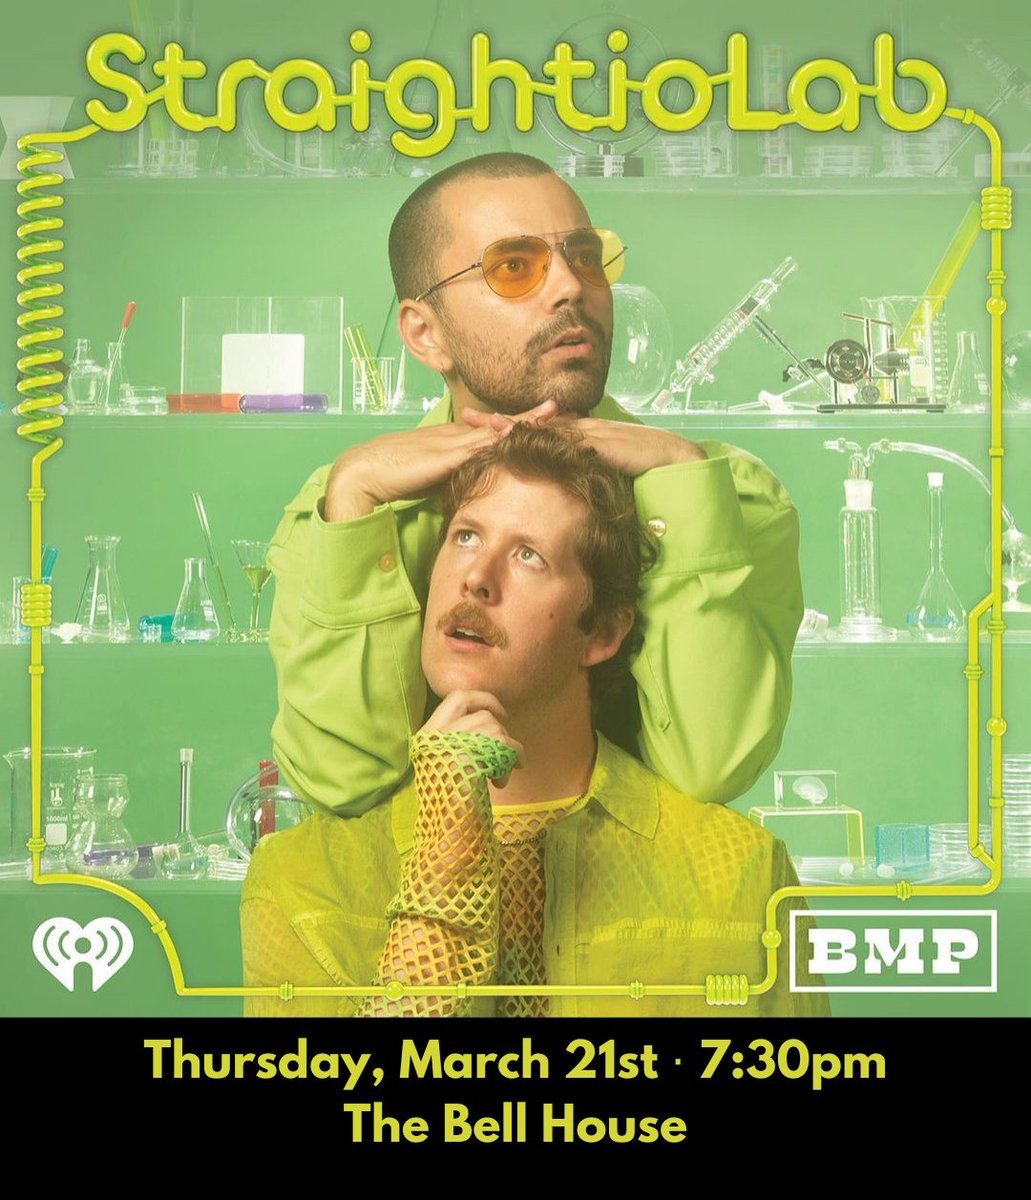 THU 3/21: @georgeciveris and @samttaggart return to unpack the rich, multi-colored tapestry of straight culture at @StraightioLab LIVE! Now featuring special guests Liza Treyger, Alex English, and @doodiehole! 🎟️: tinyurl.com/6brp562z